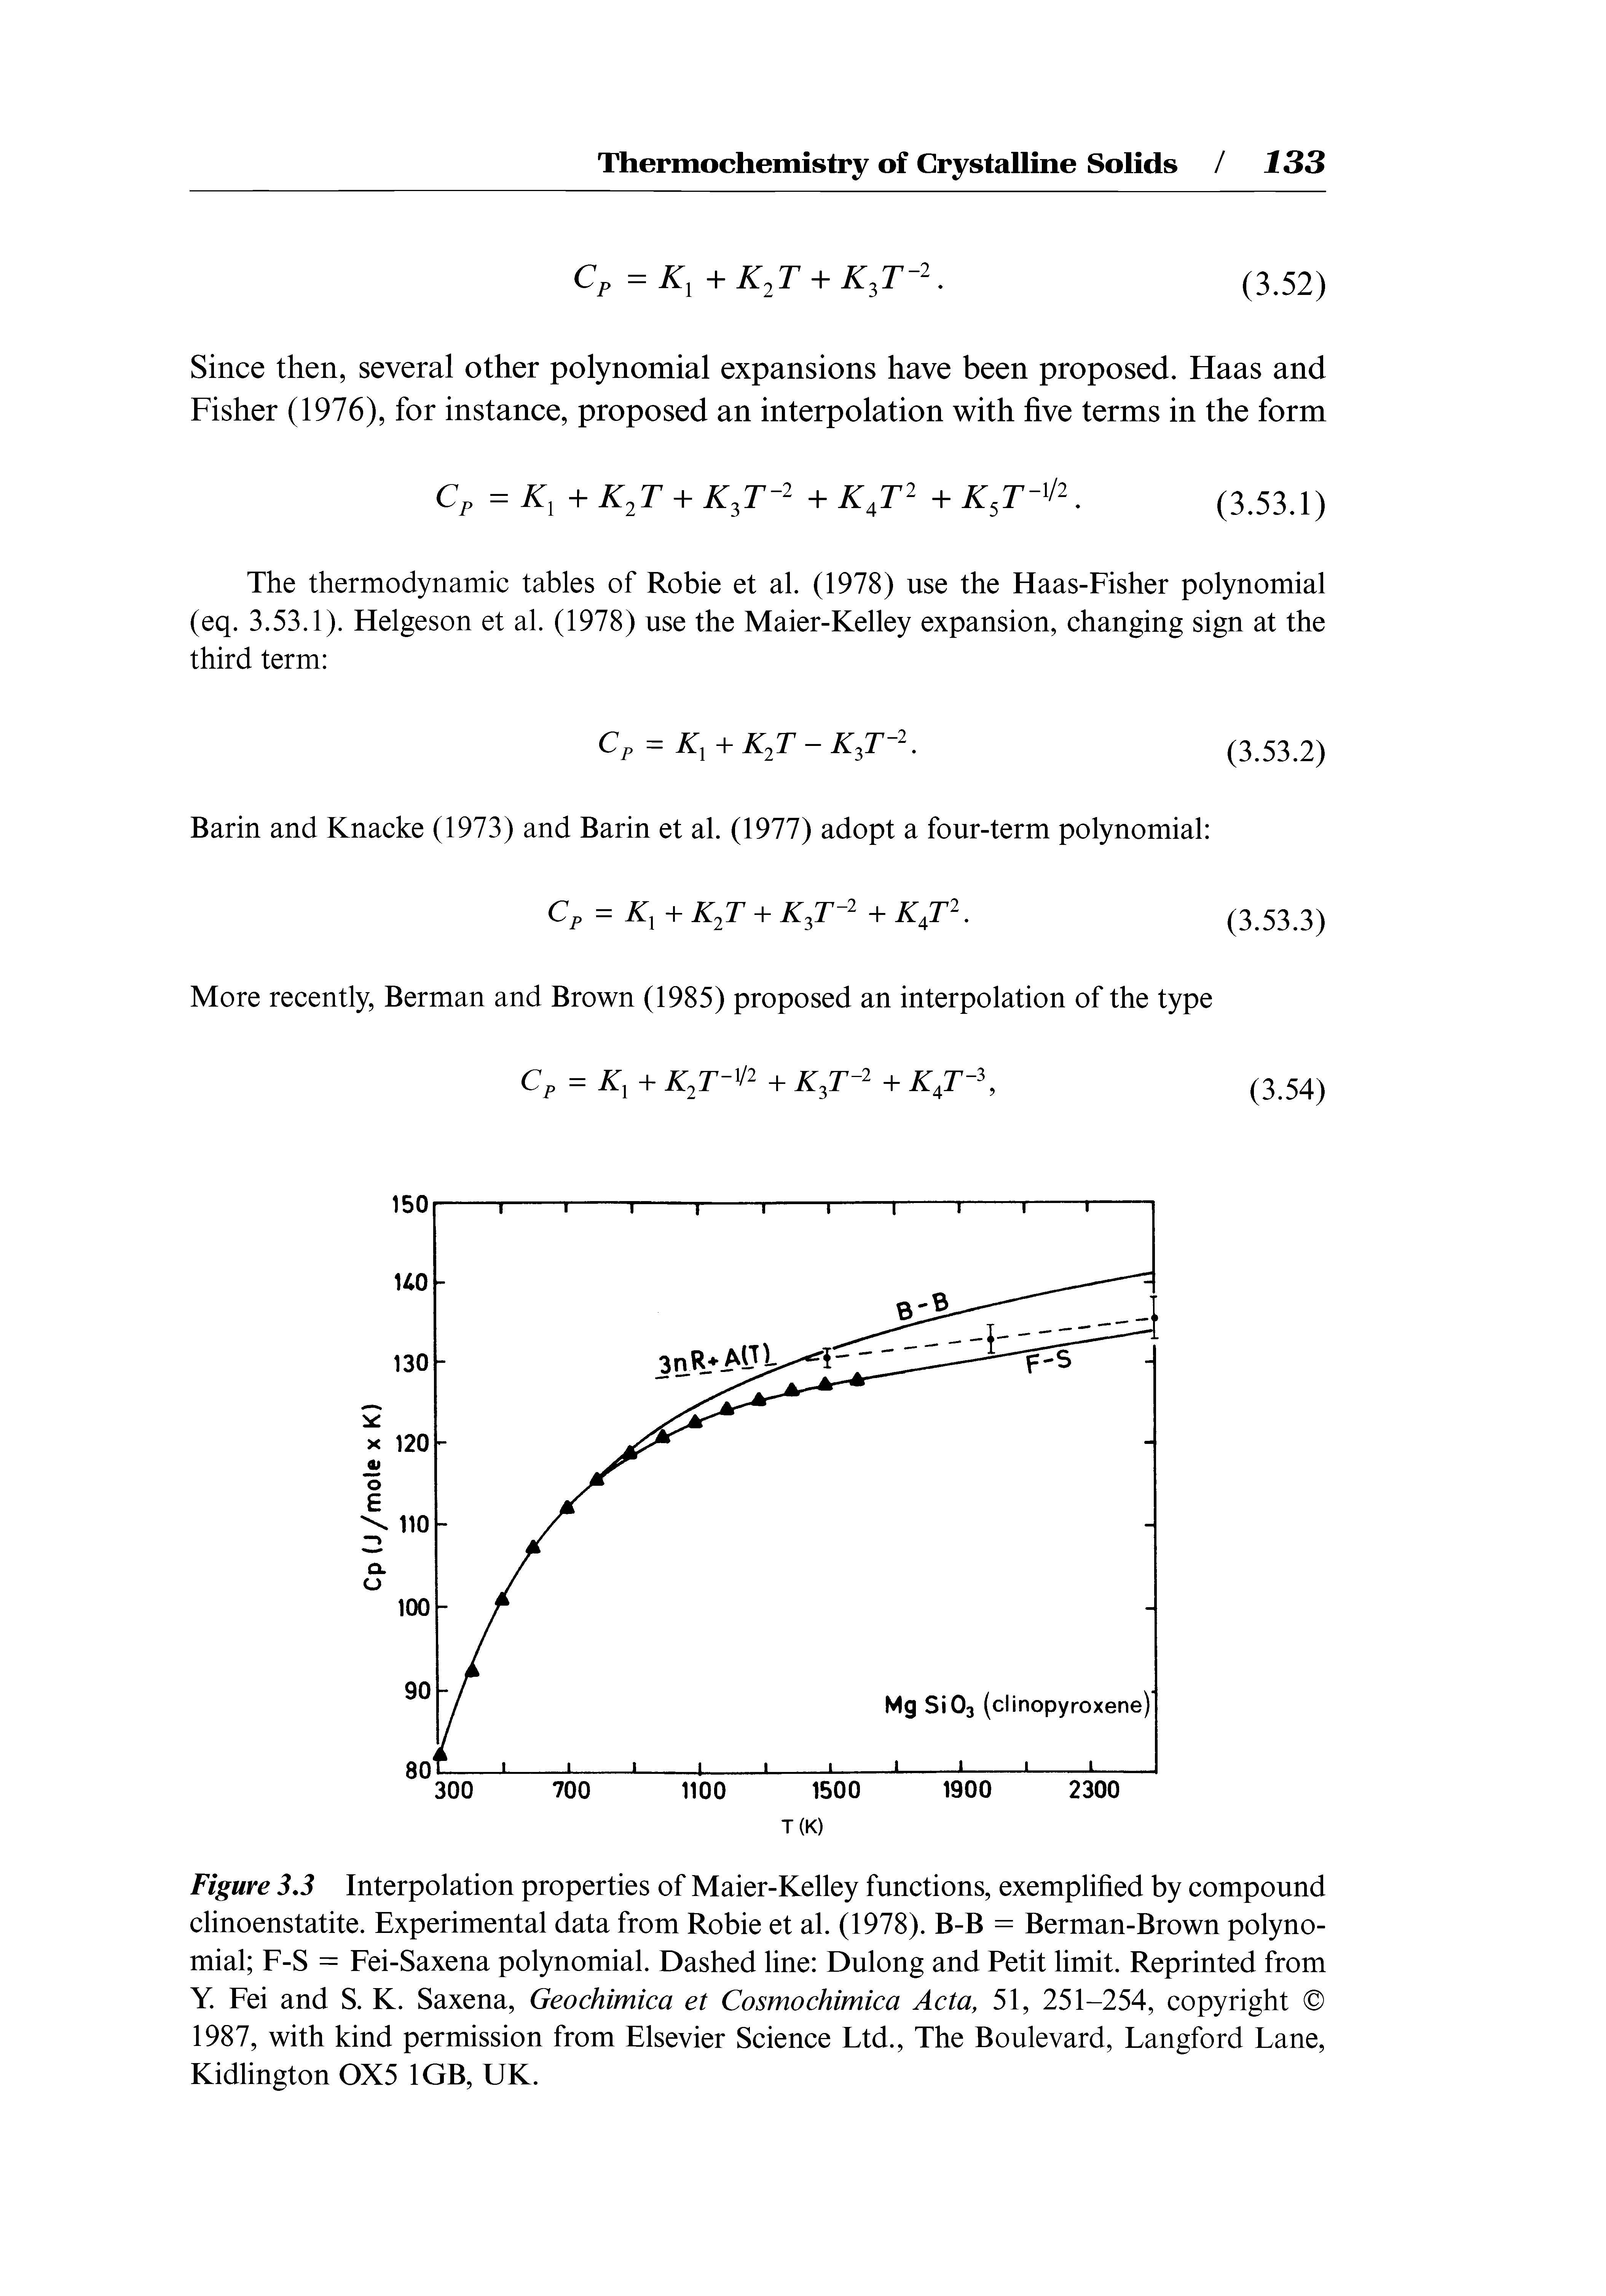 Figure 33 Interpolation properties of Maier-Kelley functions, exemplified by compound clinoenstatite. Experimental data from Robie et al. (1978). B-B = Berman-Brown polynomial F-S = Fei-Saxena polynomial. Dashed line Dulong and Petit limit. Reprinted from Y. Fei and S. K. Saxena, Geochimica et Cosmochimica Acta, 51, 251-254, copyright 1987, with kind permission from Elsevier Science Ltd., The Boulevard, Langford Lane, Kidlington 0X5 1GB, UK.